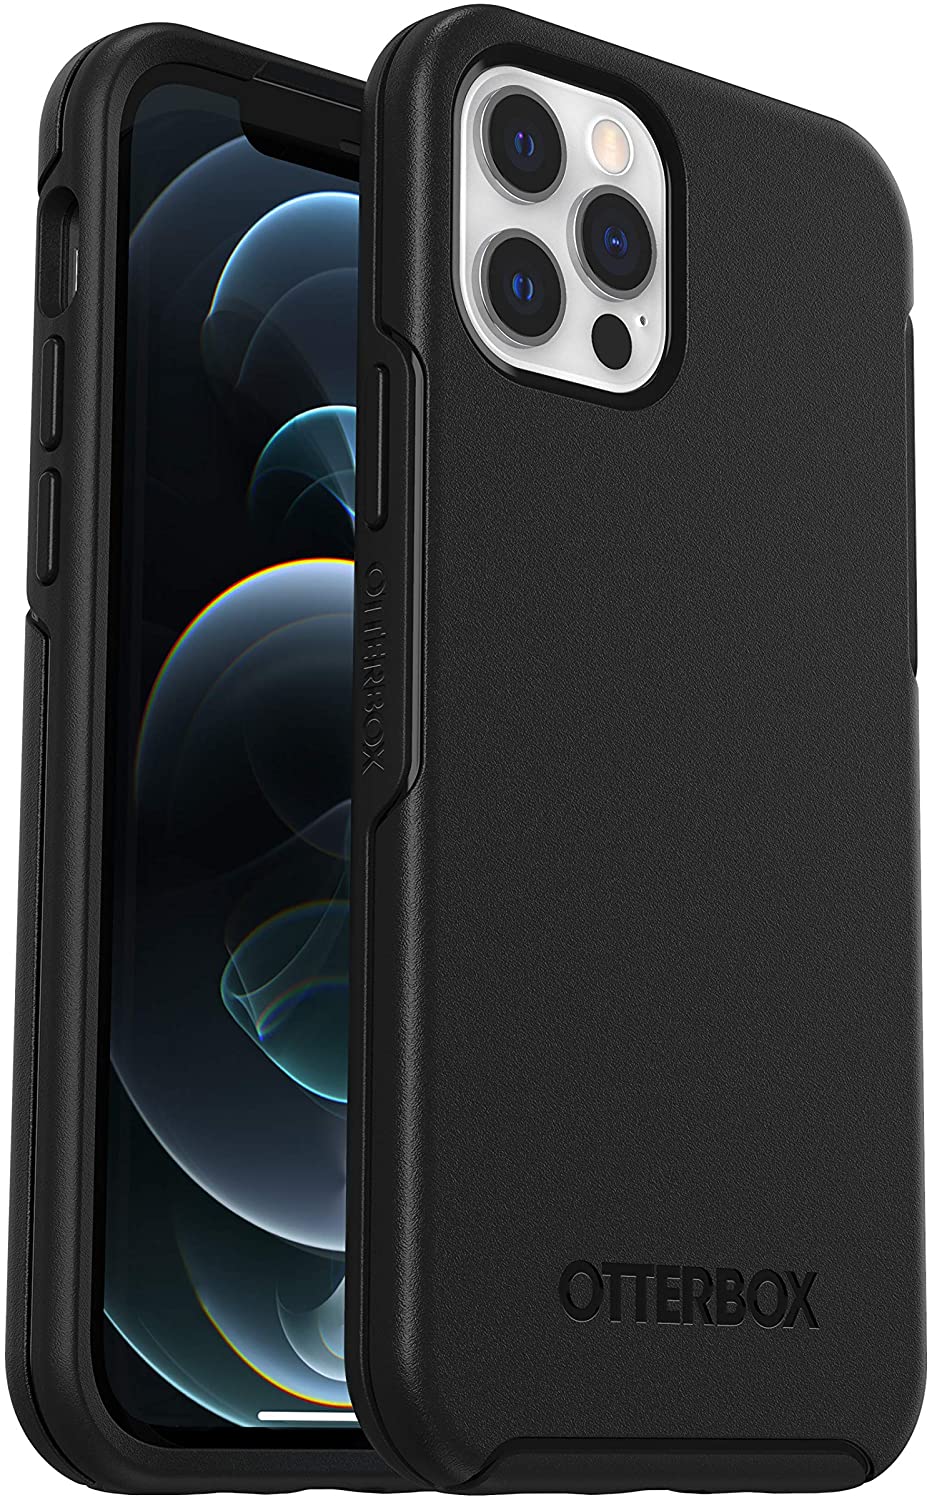 OtterBox SYMMETRY SERIES Case for iPhone 12 / iPhone 12 Pro - Black (New)